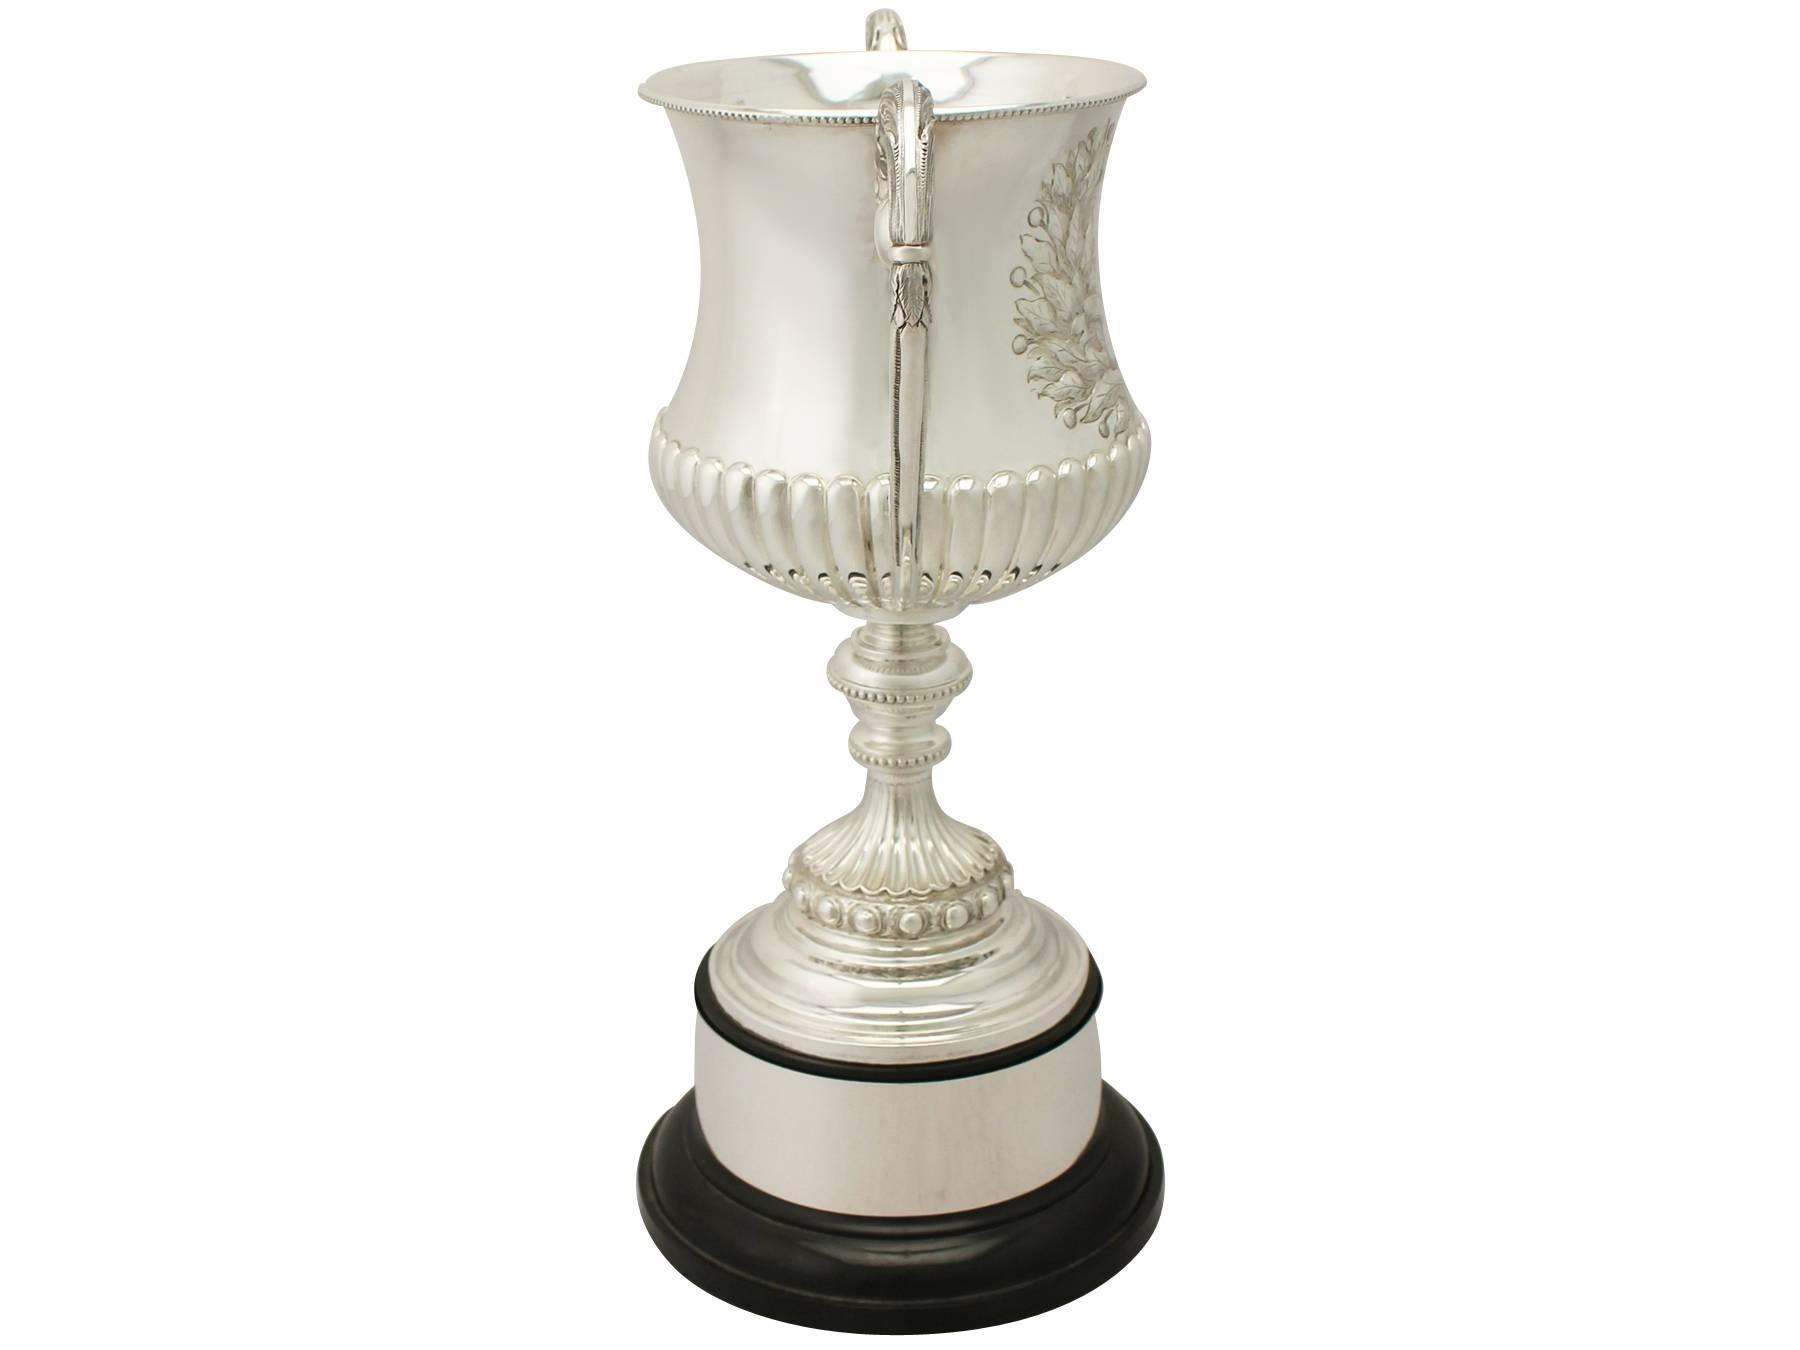 A fine and impressive antique Victorian English sterling silver presentation cup; an addition to our presentation silverware collection.

This fine antique Victorian sterling silver presentation cup has a Campania shaped form to a knopped pedestal